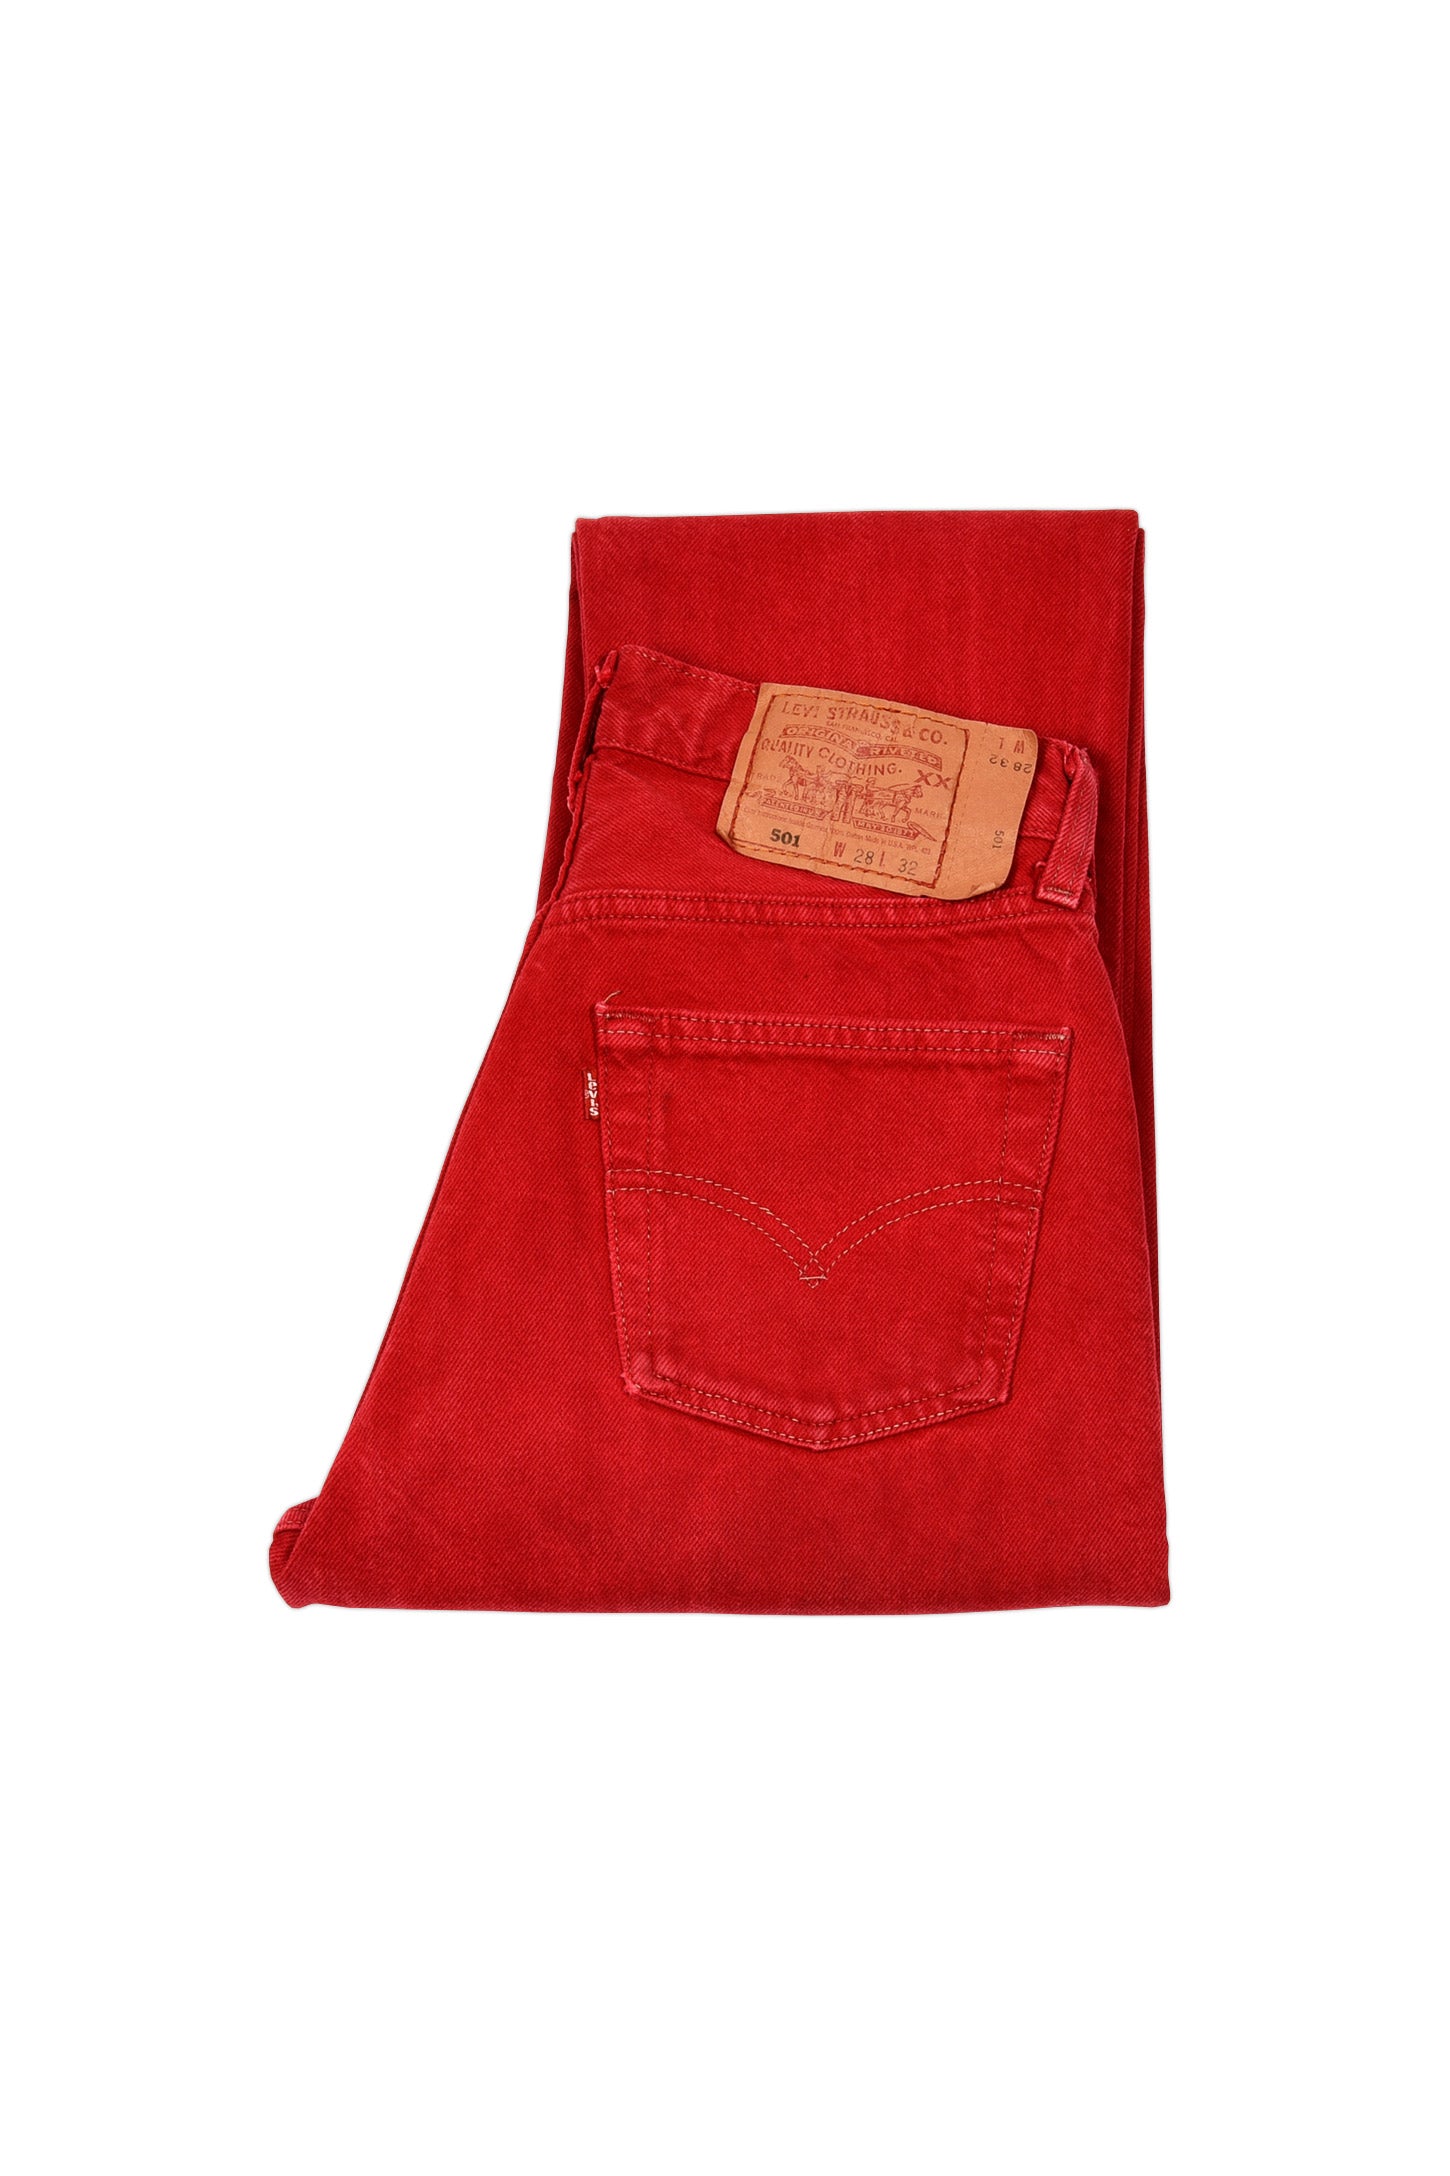 red levi 501